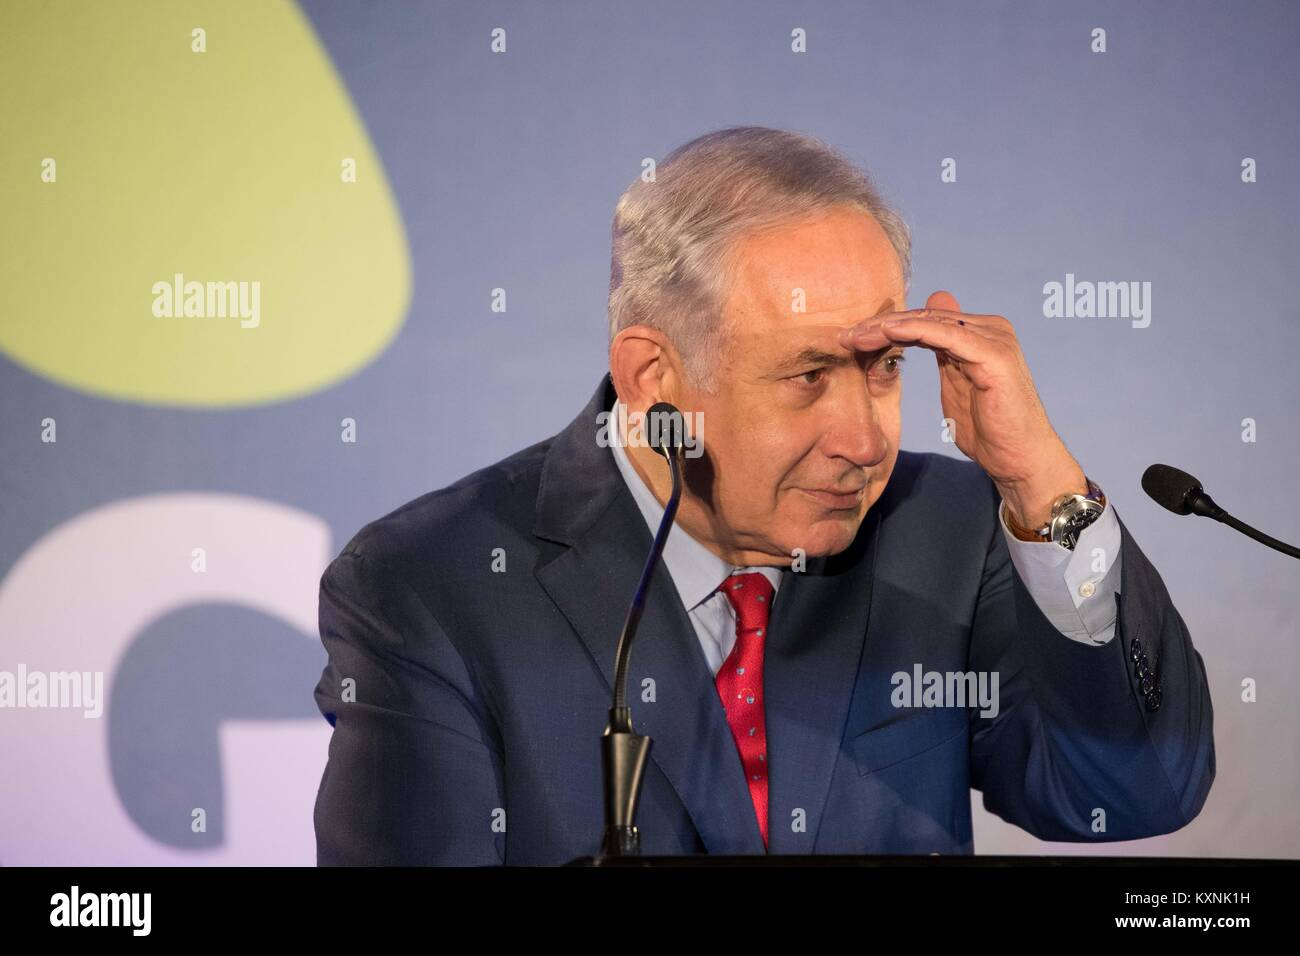 Jerusalem. 10th Jan, 2018. Israeli Prime Minister Benjamin Netanyahu attends the annual Government Press Office (GPO) New Year's toast for foreign journalists in Jerusalem, on Jan. 10, 2018. Credit: JINI/Xinhua/Alamy Live News Stock Photo